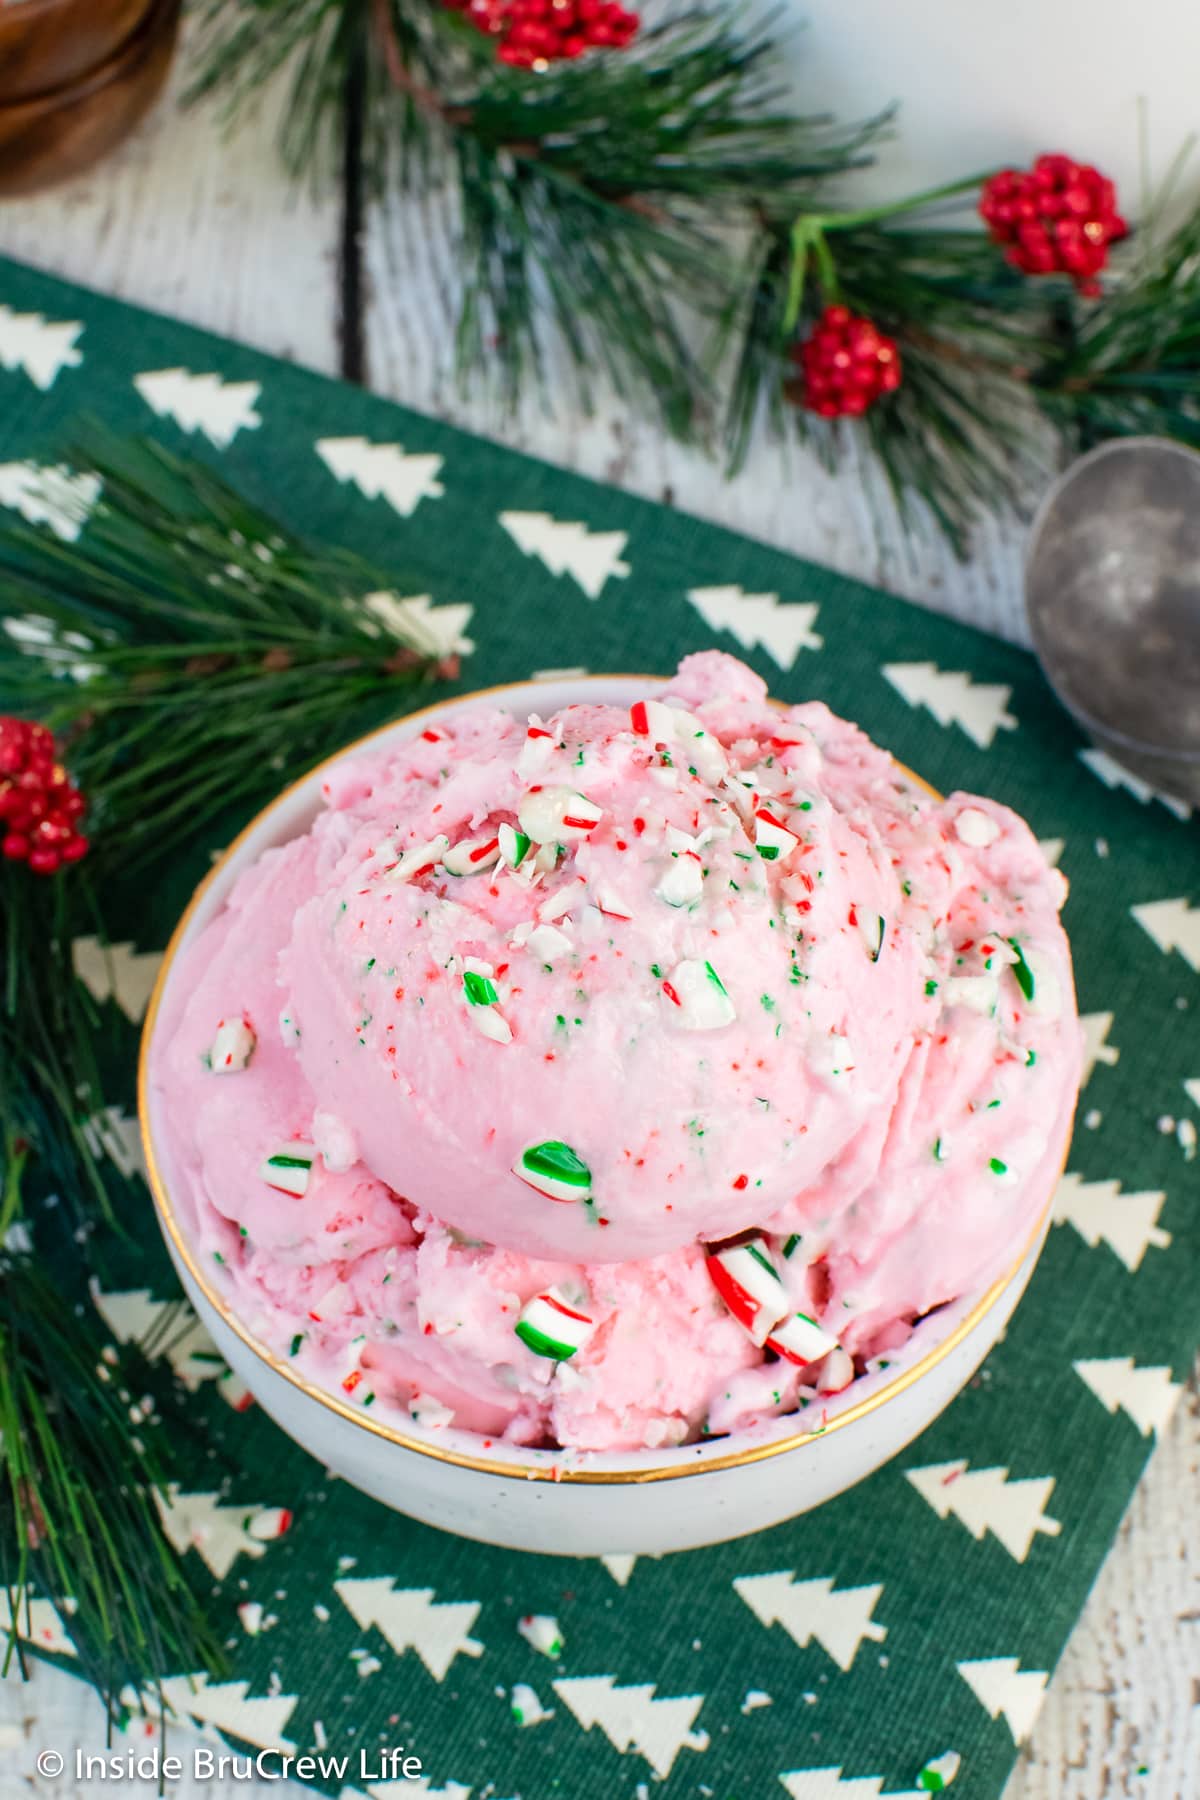 Pink ice cream in a white bowl.